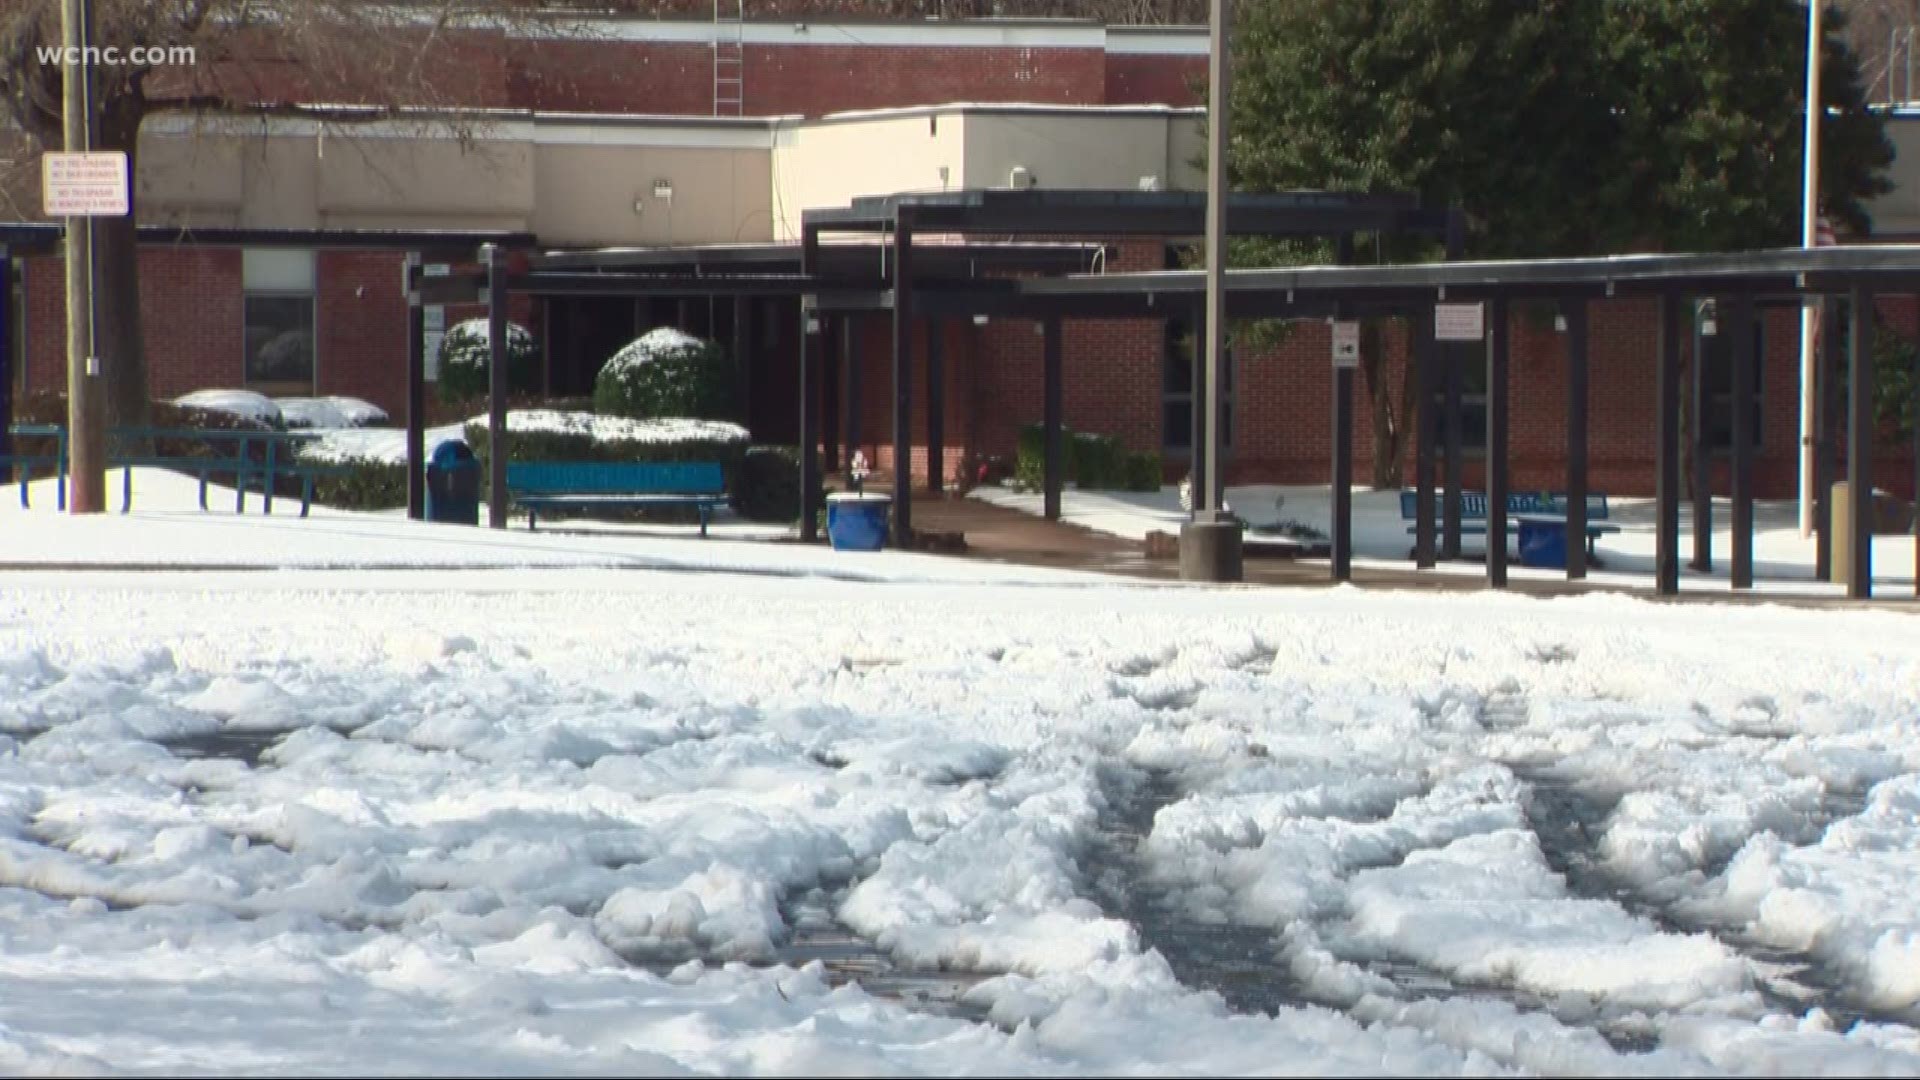 Charlotte-Mecklenburg Schools officials say the safety of all students is the driving factor in their decision to delay classes for Tuesday, December 11.